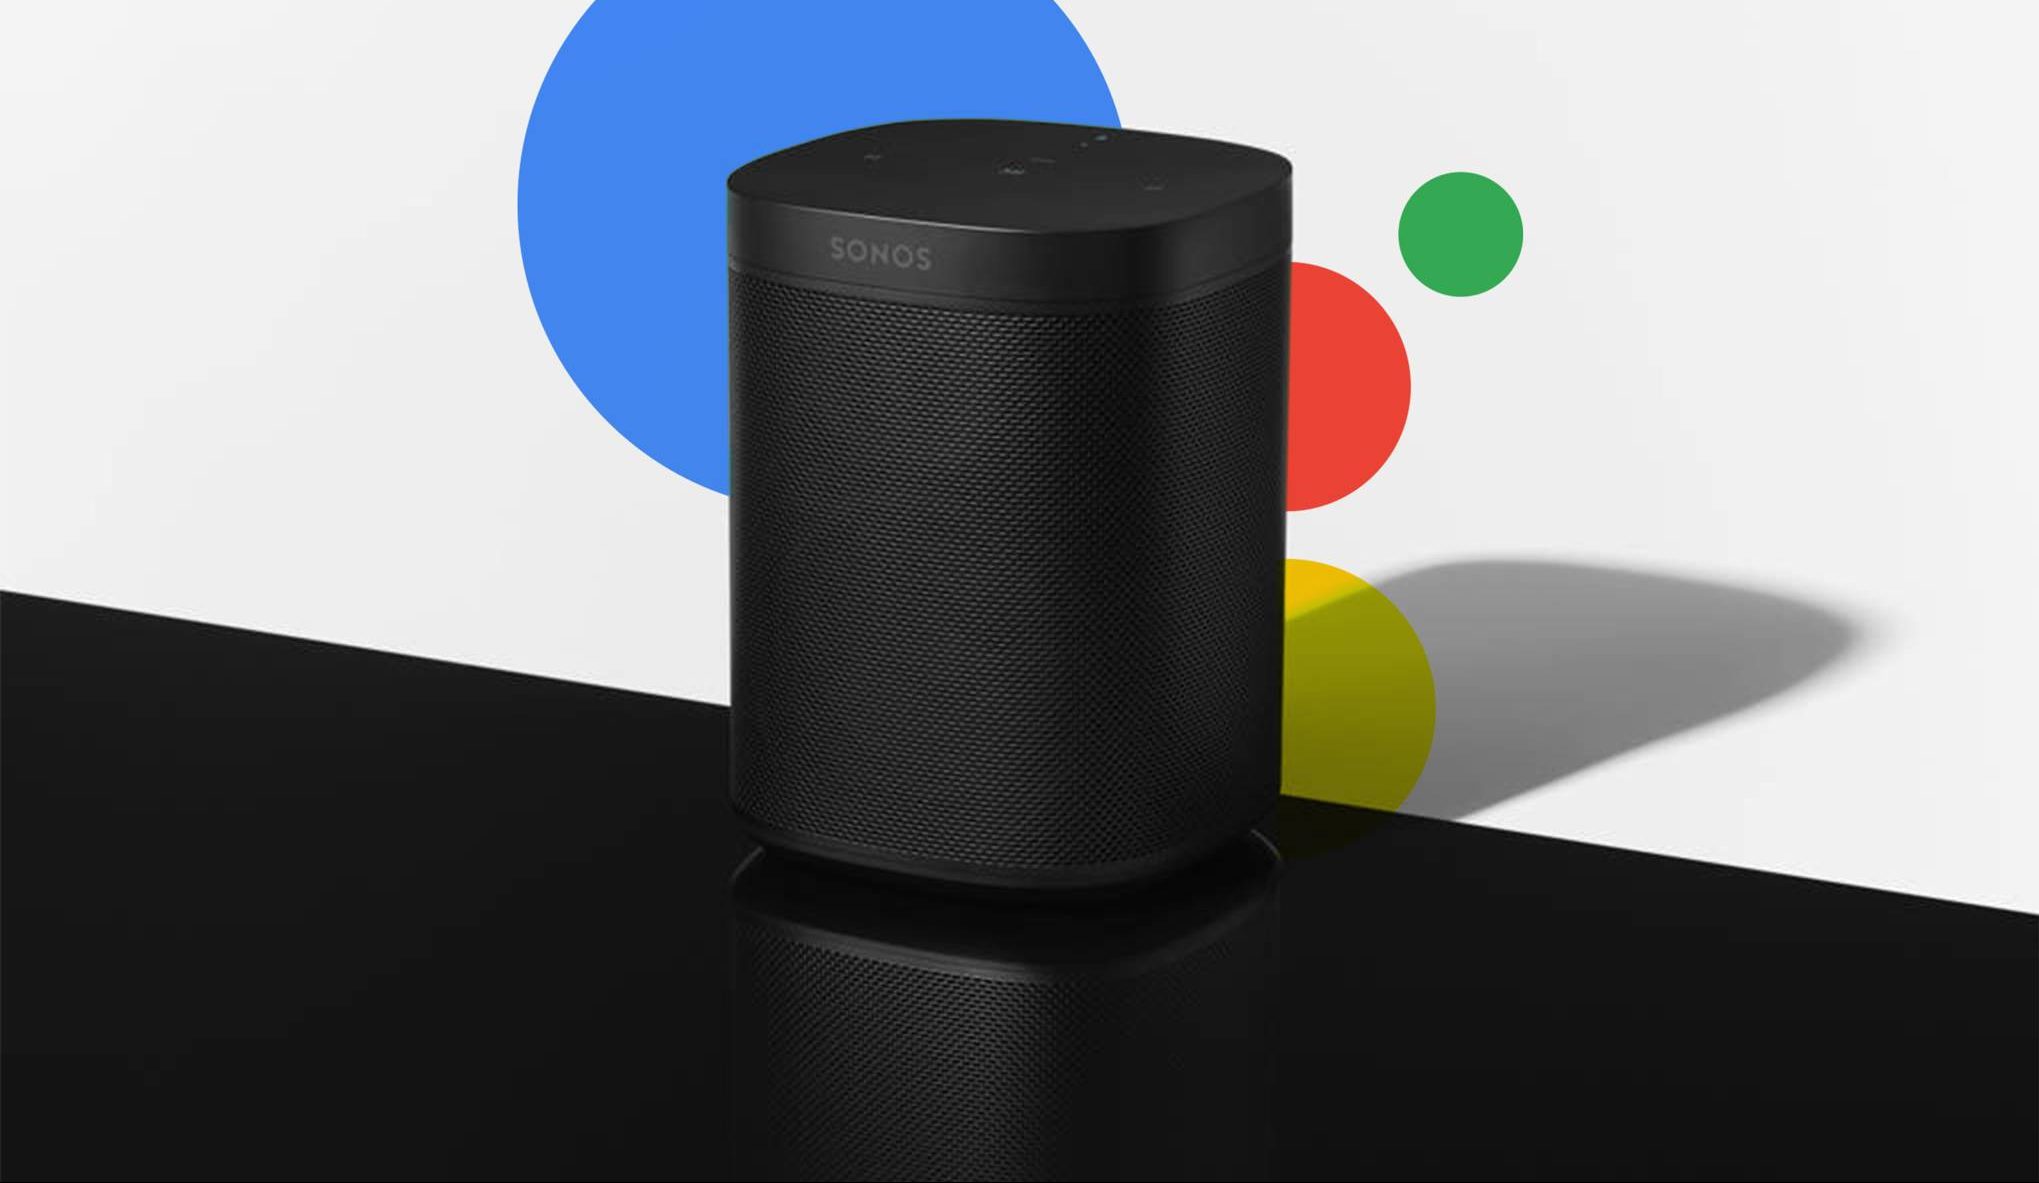 to enable Google Assistant on your Sonos and turn it into smart